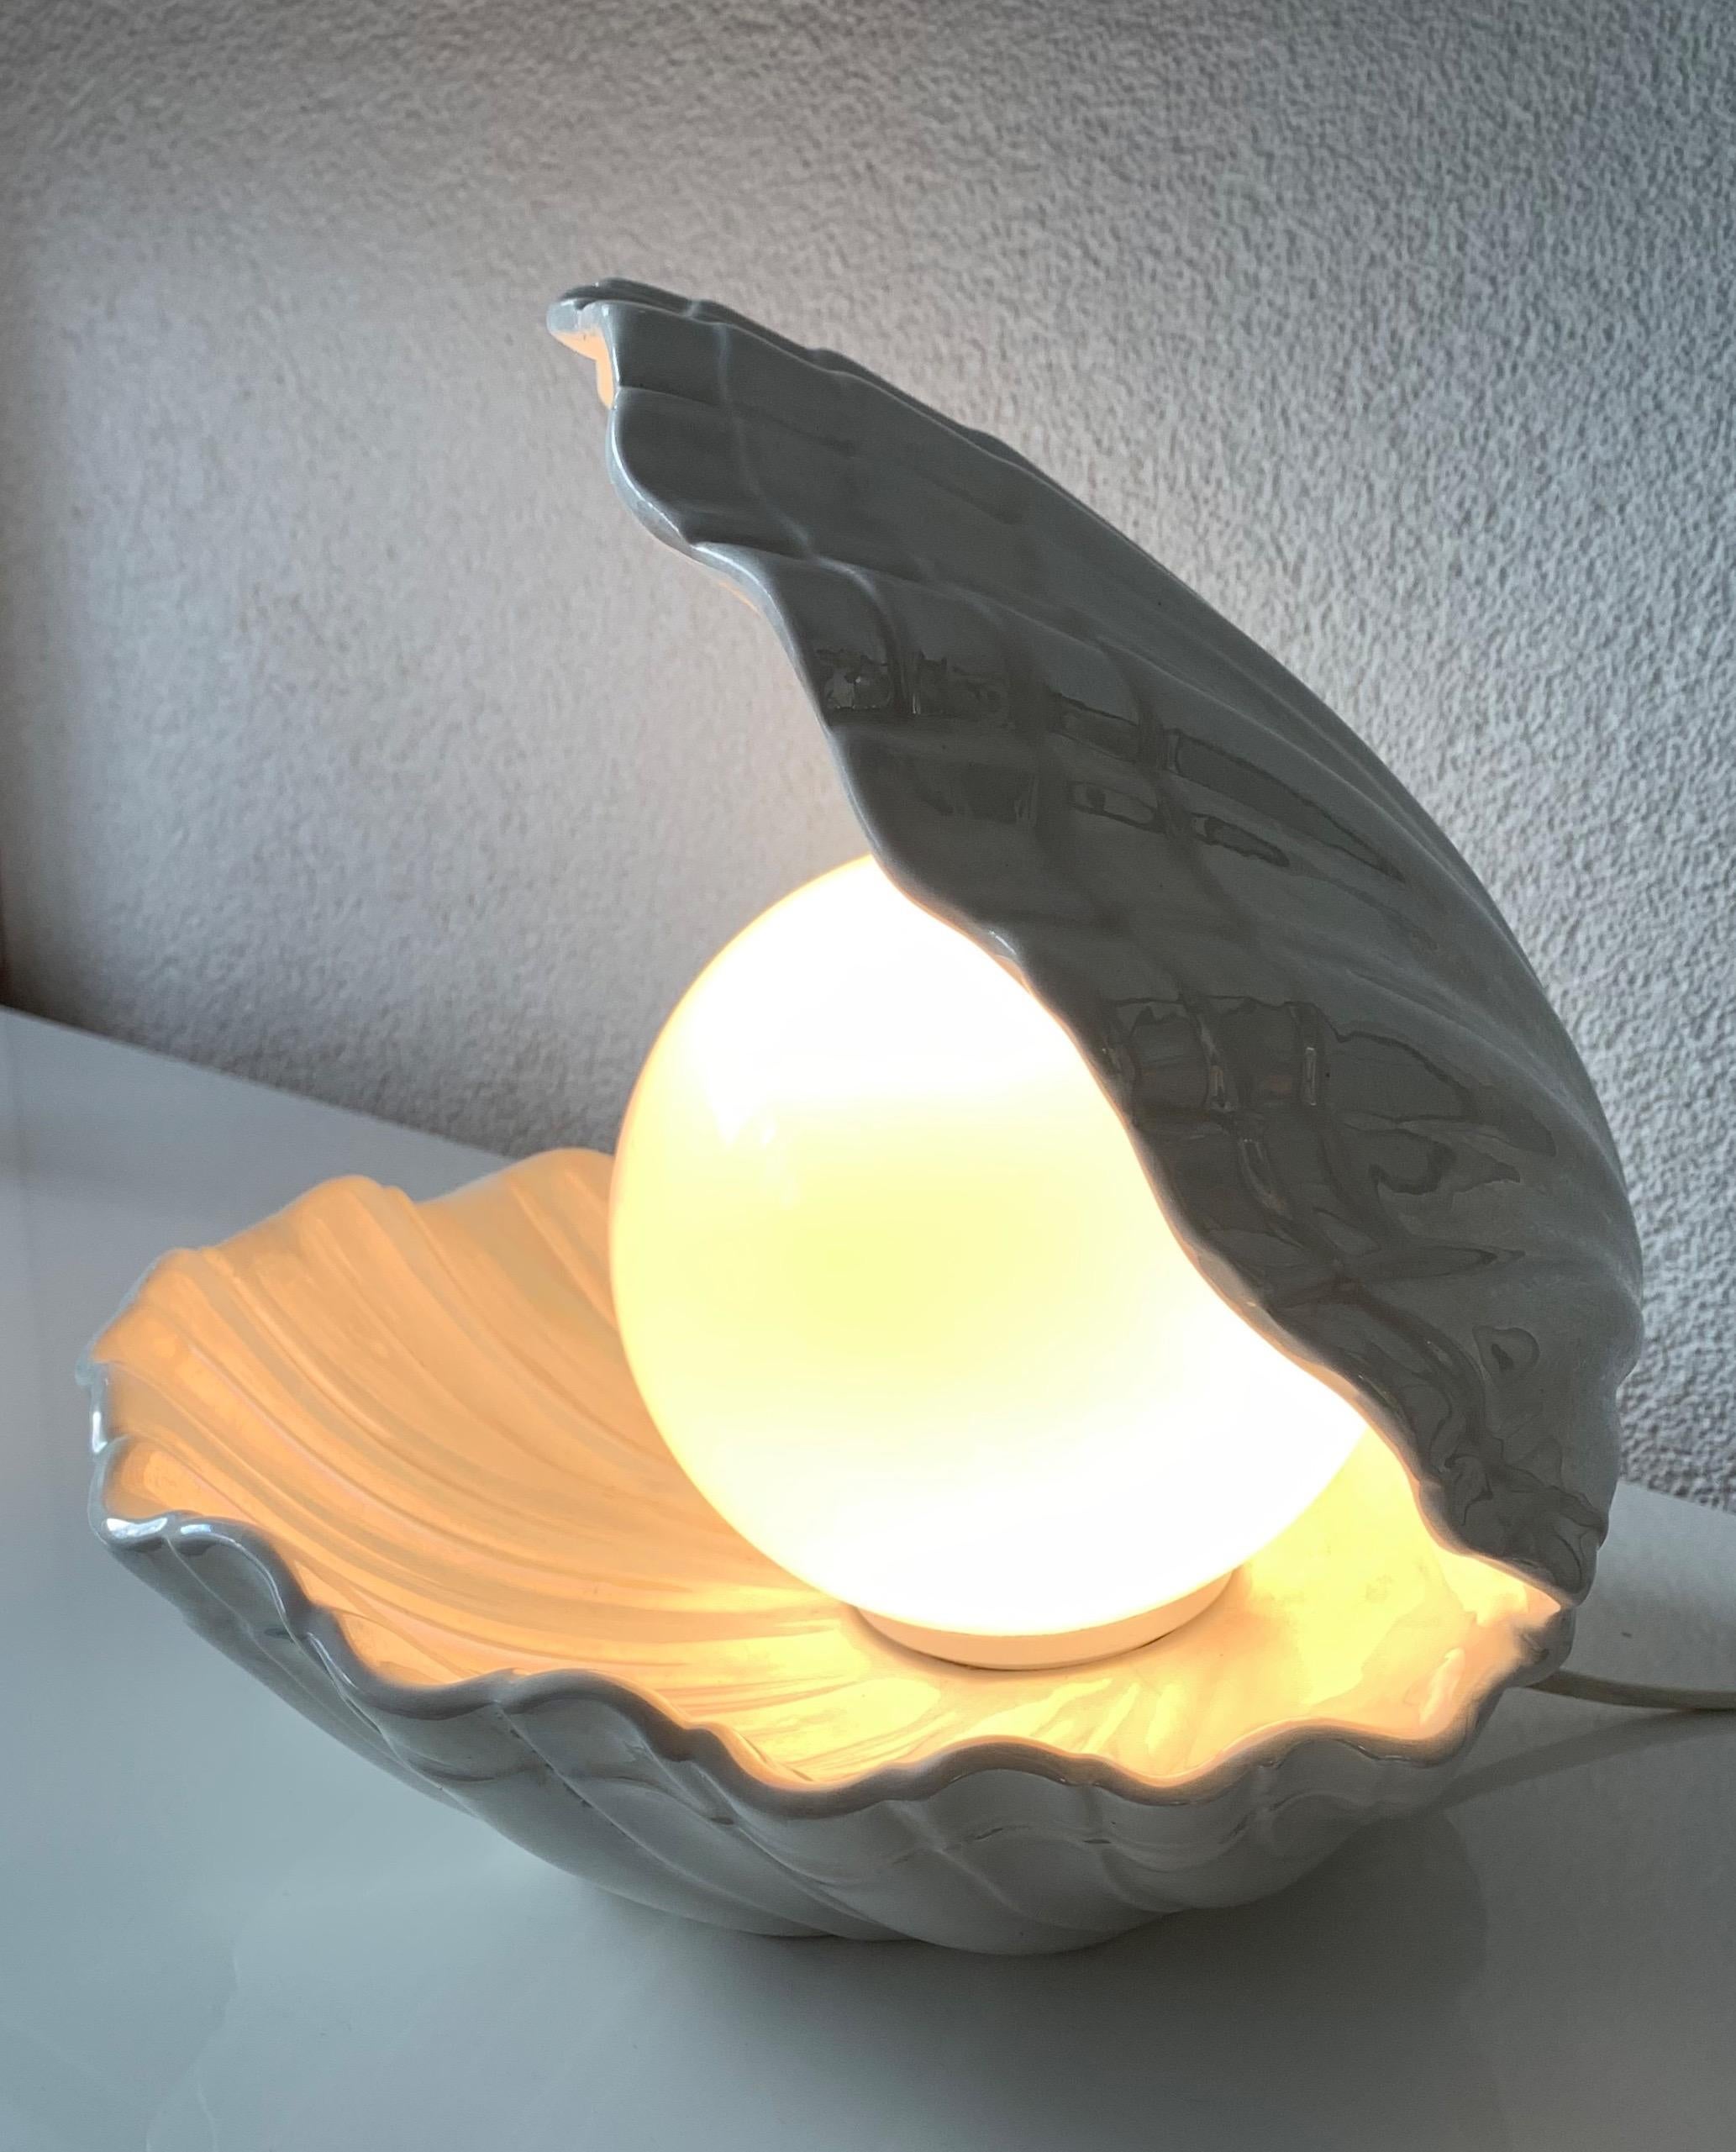 Good quality and artistic pearlescent table lamp.

If you are looking for an out of the ordinary table or night lamp then this rare specimen could be just perfect for you. This sculptural ceramic light is very realistic and its clam and pearl